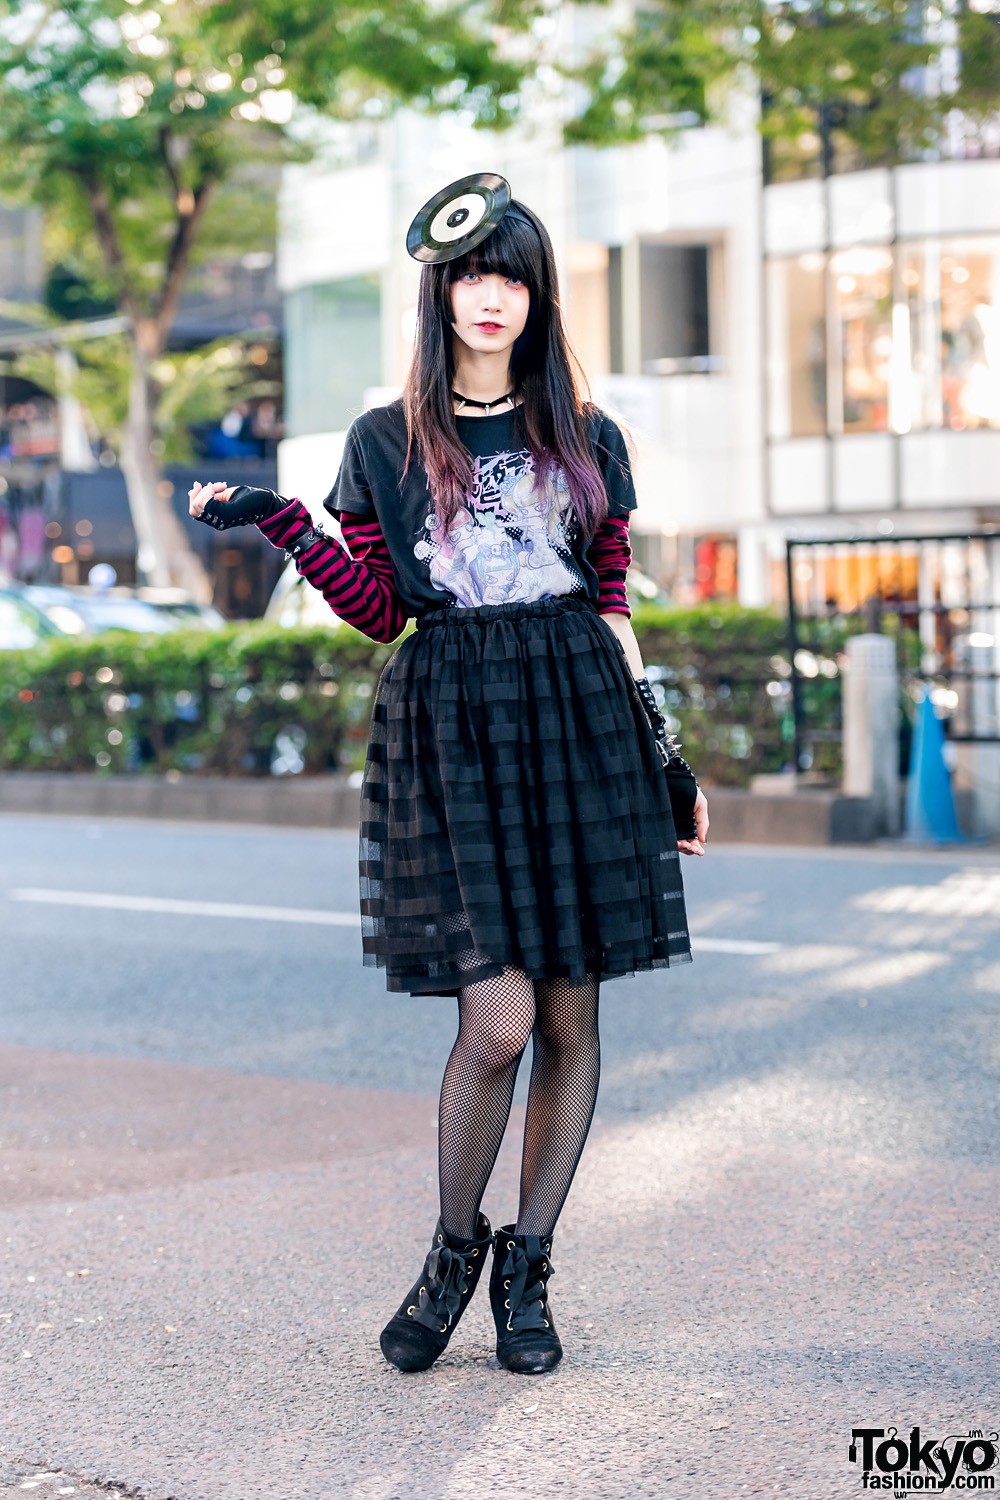 Sinz Harajuku Street Style w/ Vinyl Record Headpiece, Hyper Core Shirt, Tulle Skirt & Pointy Suede Booties